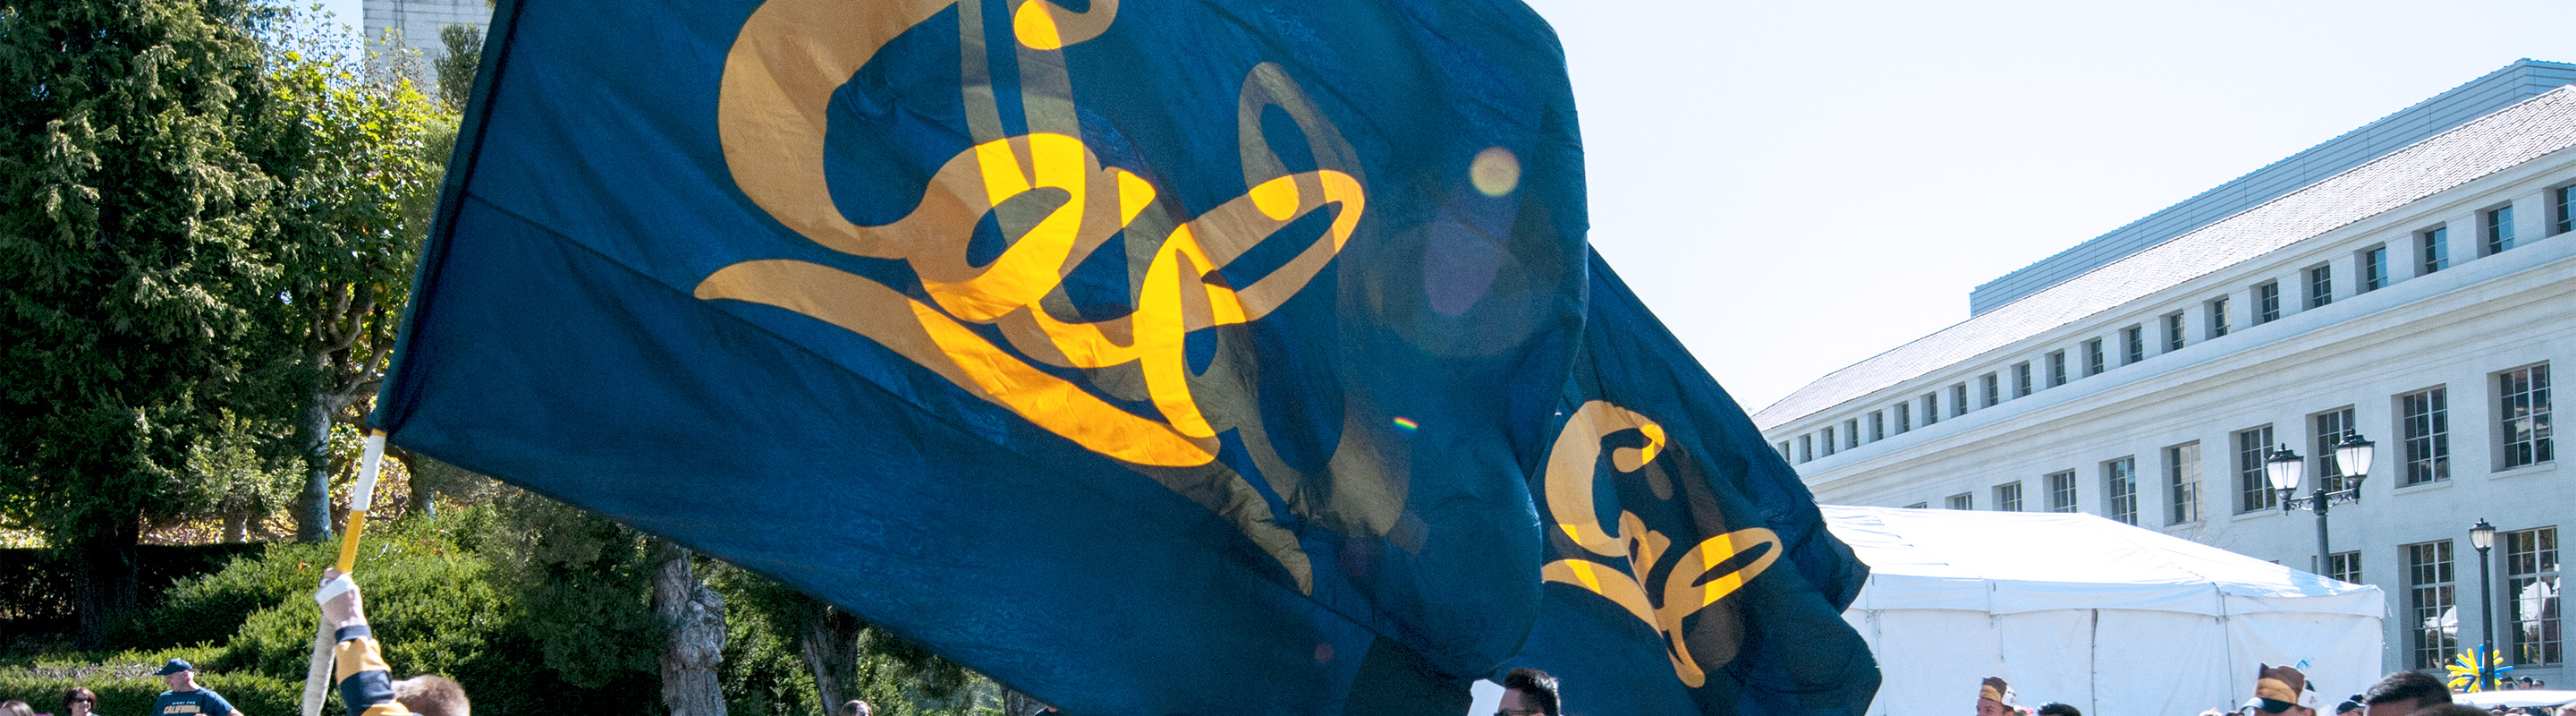 Cal Flags over field